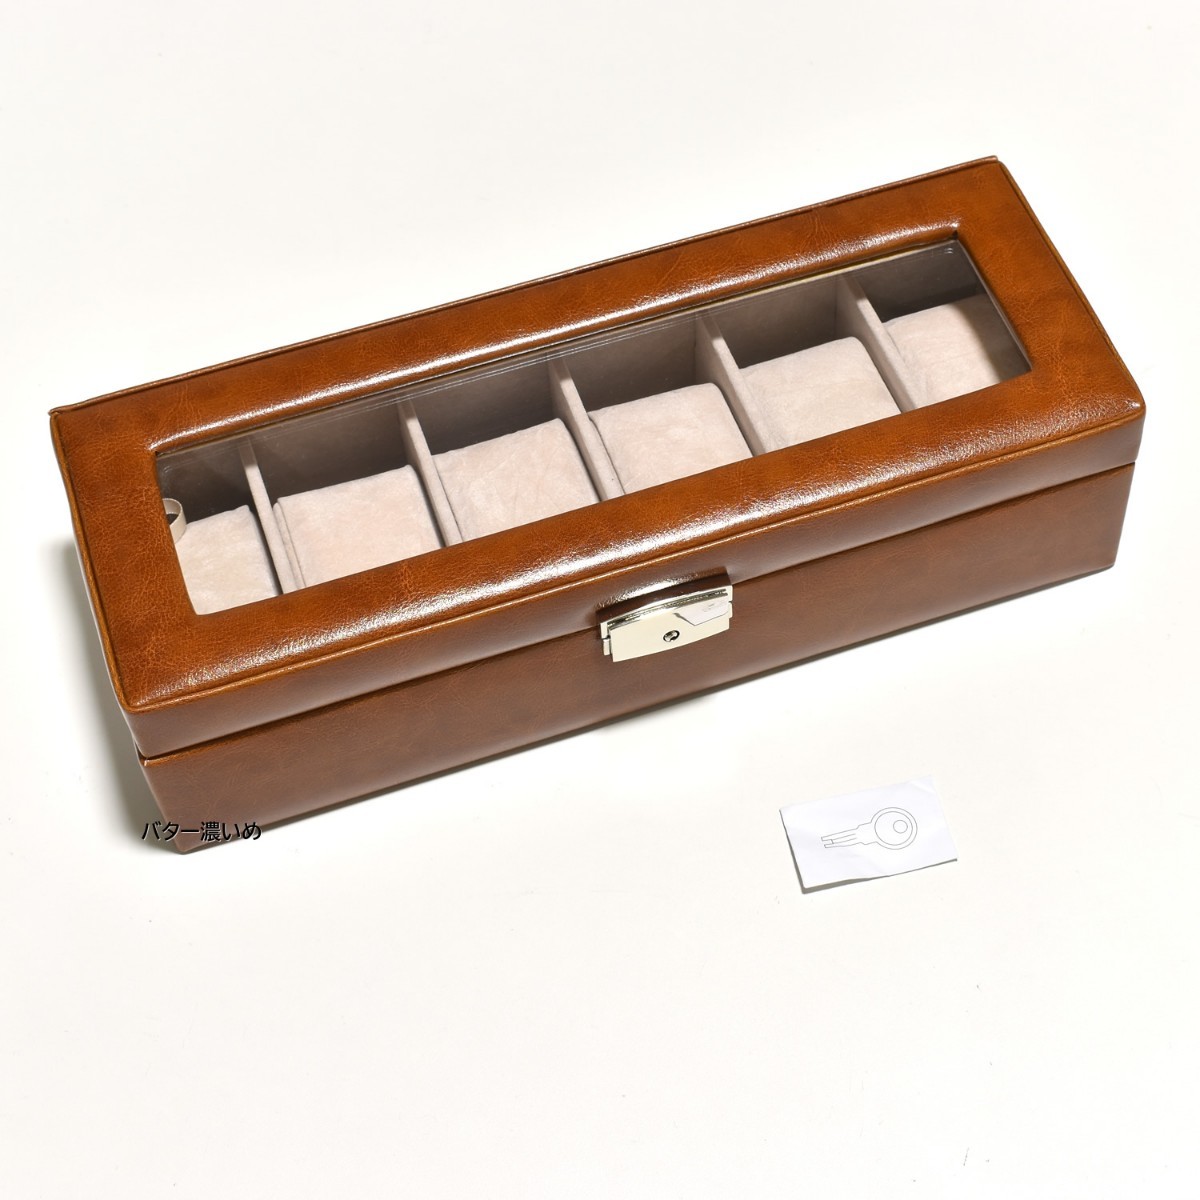 [ with translation ] watch box 6ps.@ for clock box storage case storage box wristwatch key attaching collection case Brown unused 